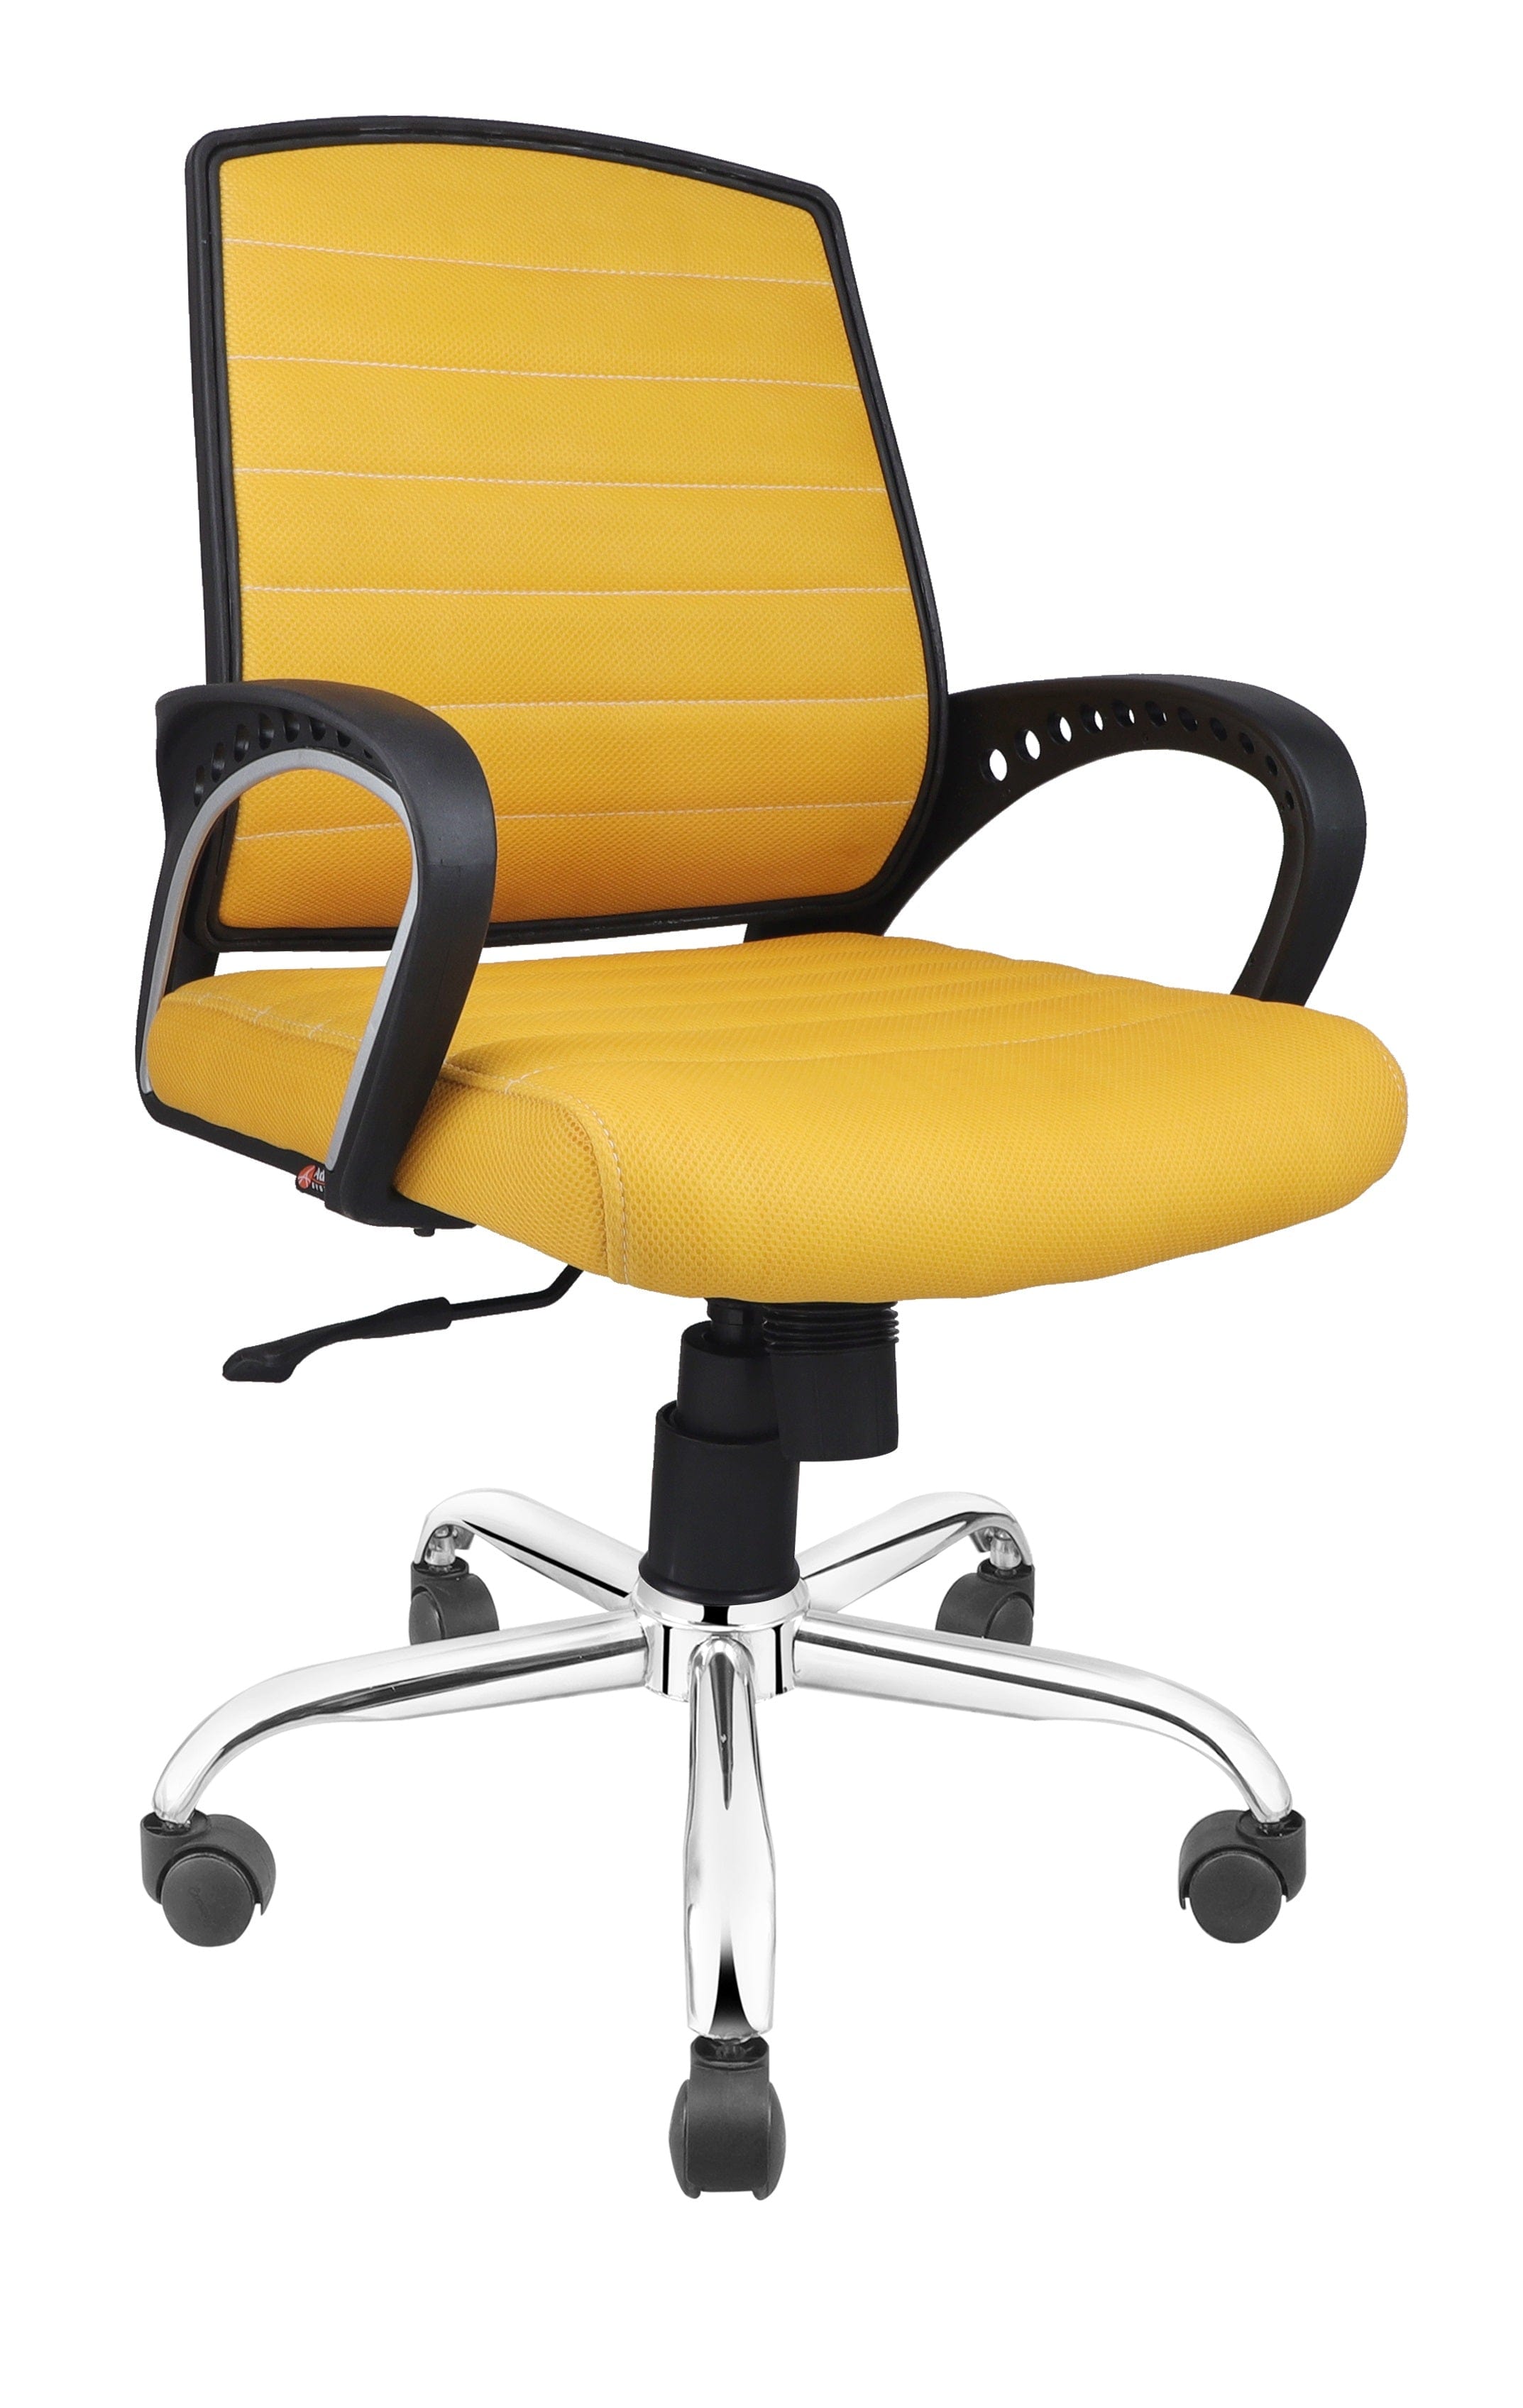 Smart Ergonomic Chair With Breathable Yellow Mesh Fabric